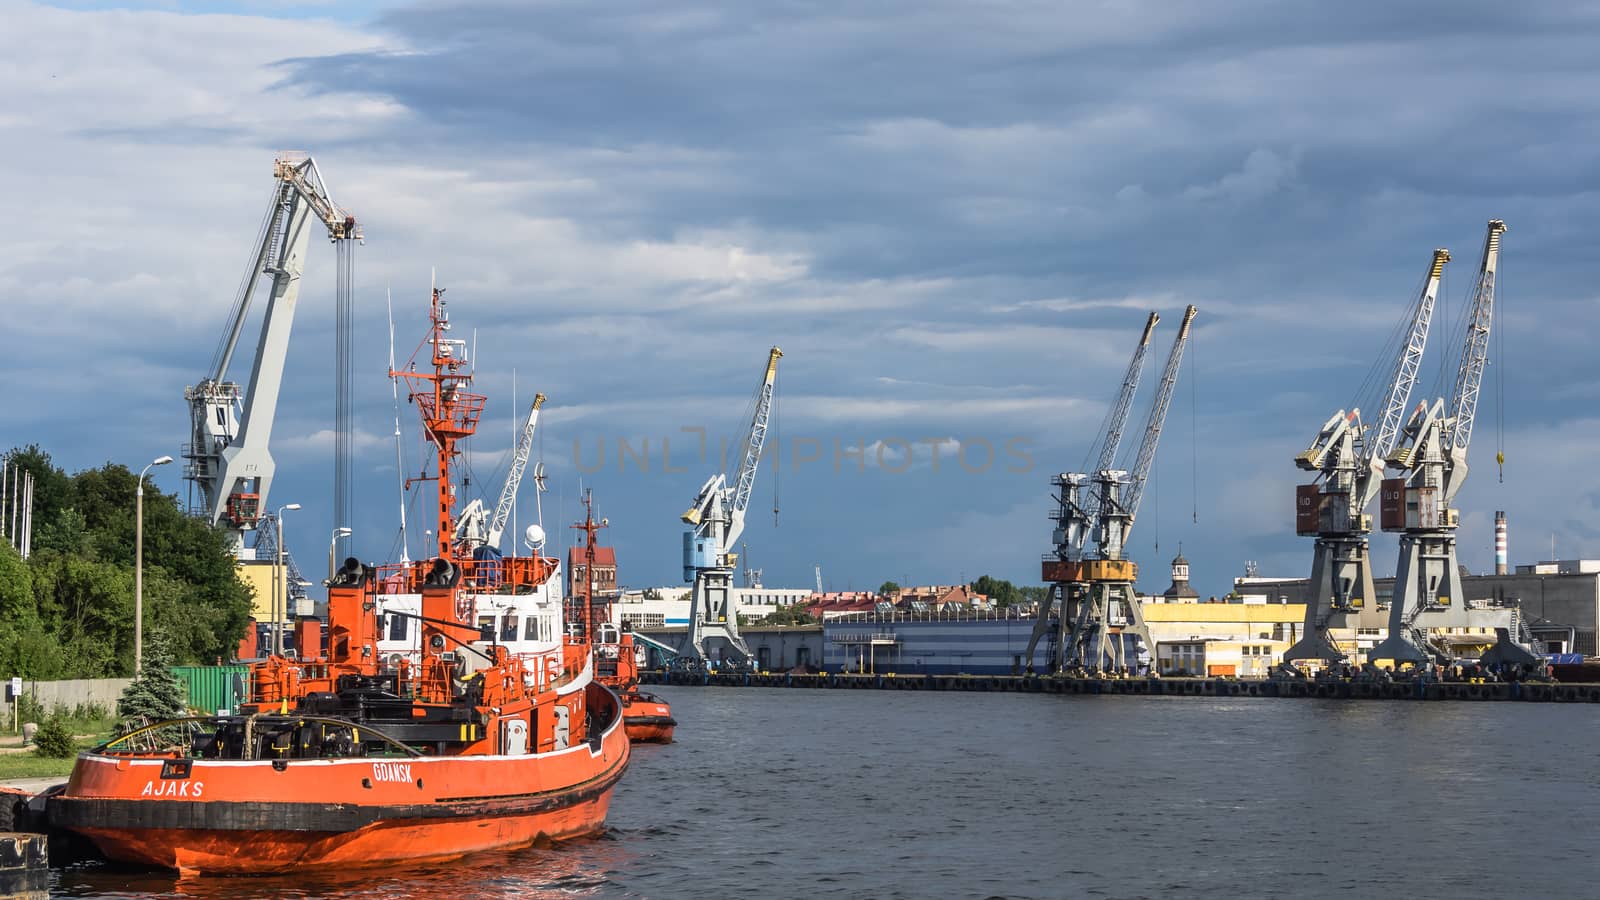 Tugboats at the quay on July 11, 2013, in the Port of Gdansk - the largest seaport in Poland, a major transportation hub in the central part of the southern Baltic Sea coast.